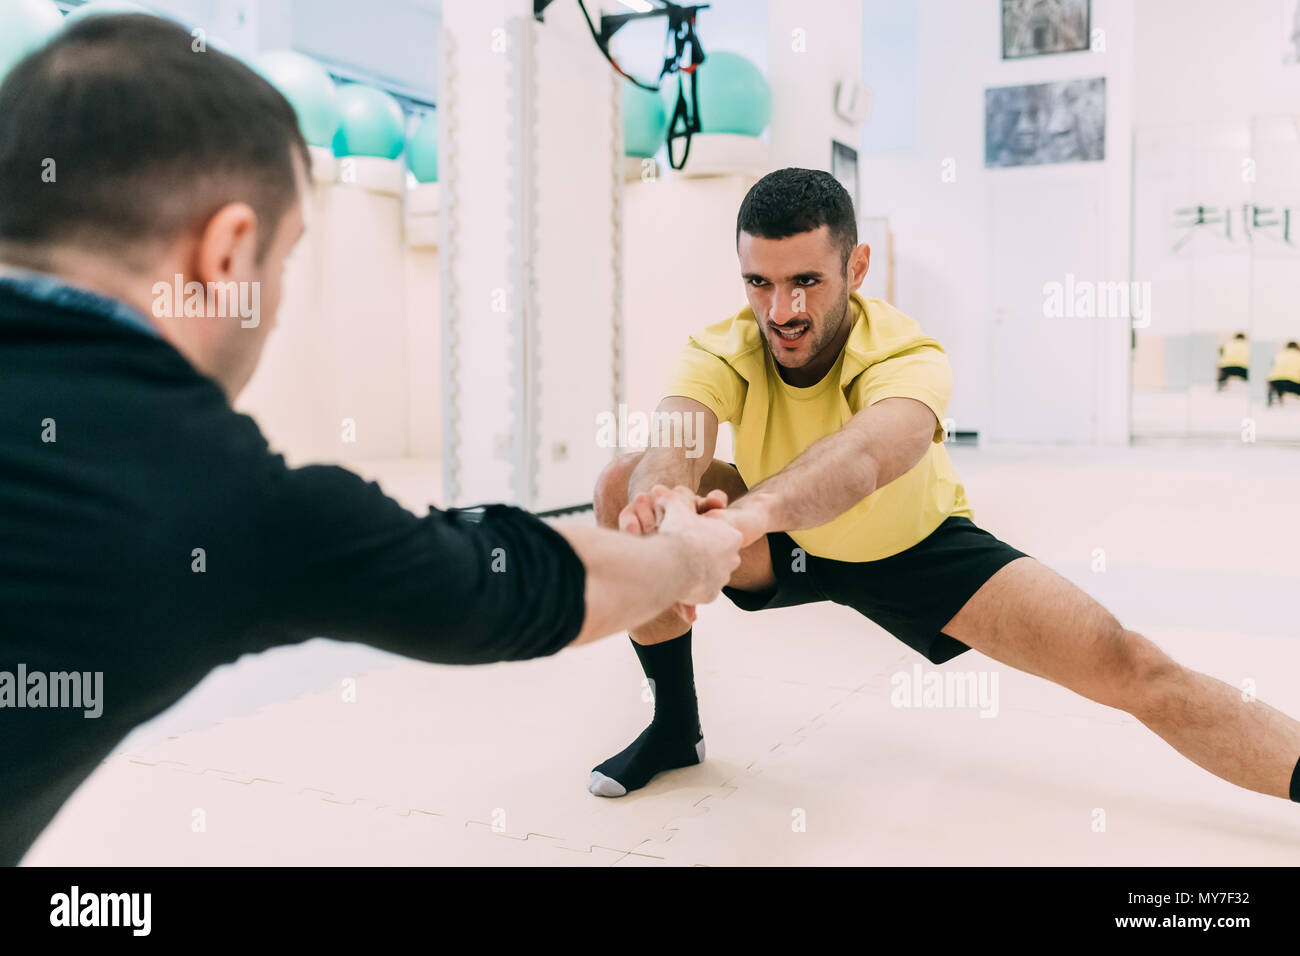 Men in gym doing stretching exercises Stock Photo